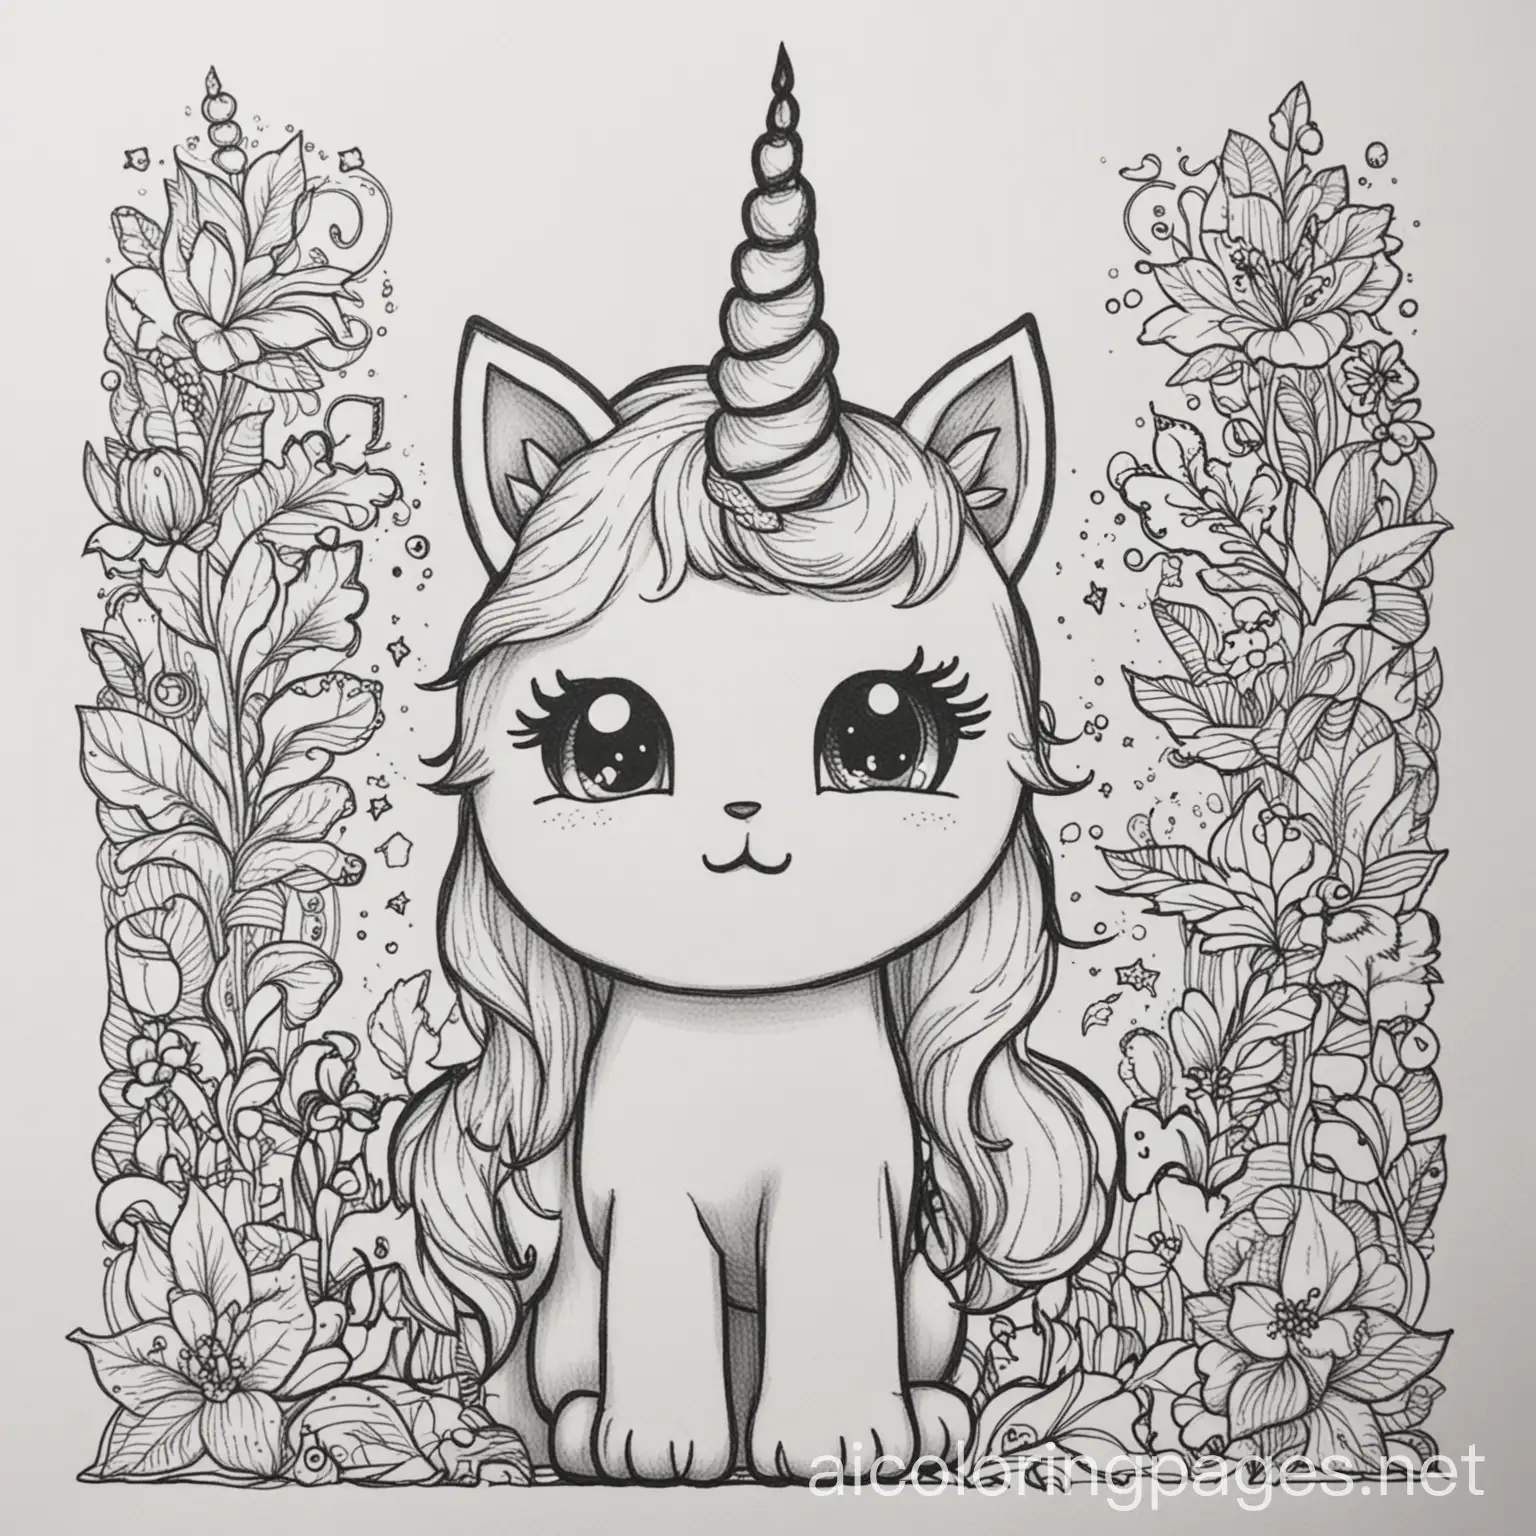 Kitty-Unicorn-5th-Birthday-Party-Coloring-Page-Whimsical-Line-Art-for-Kids